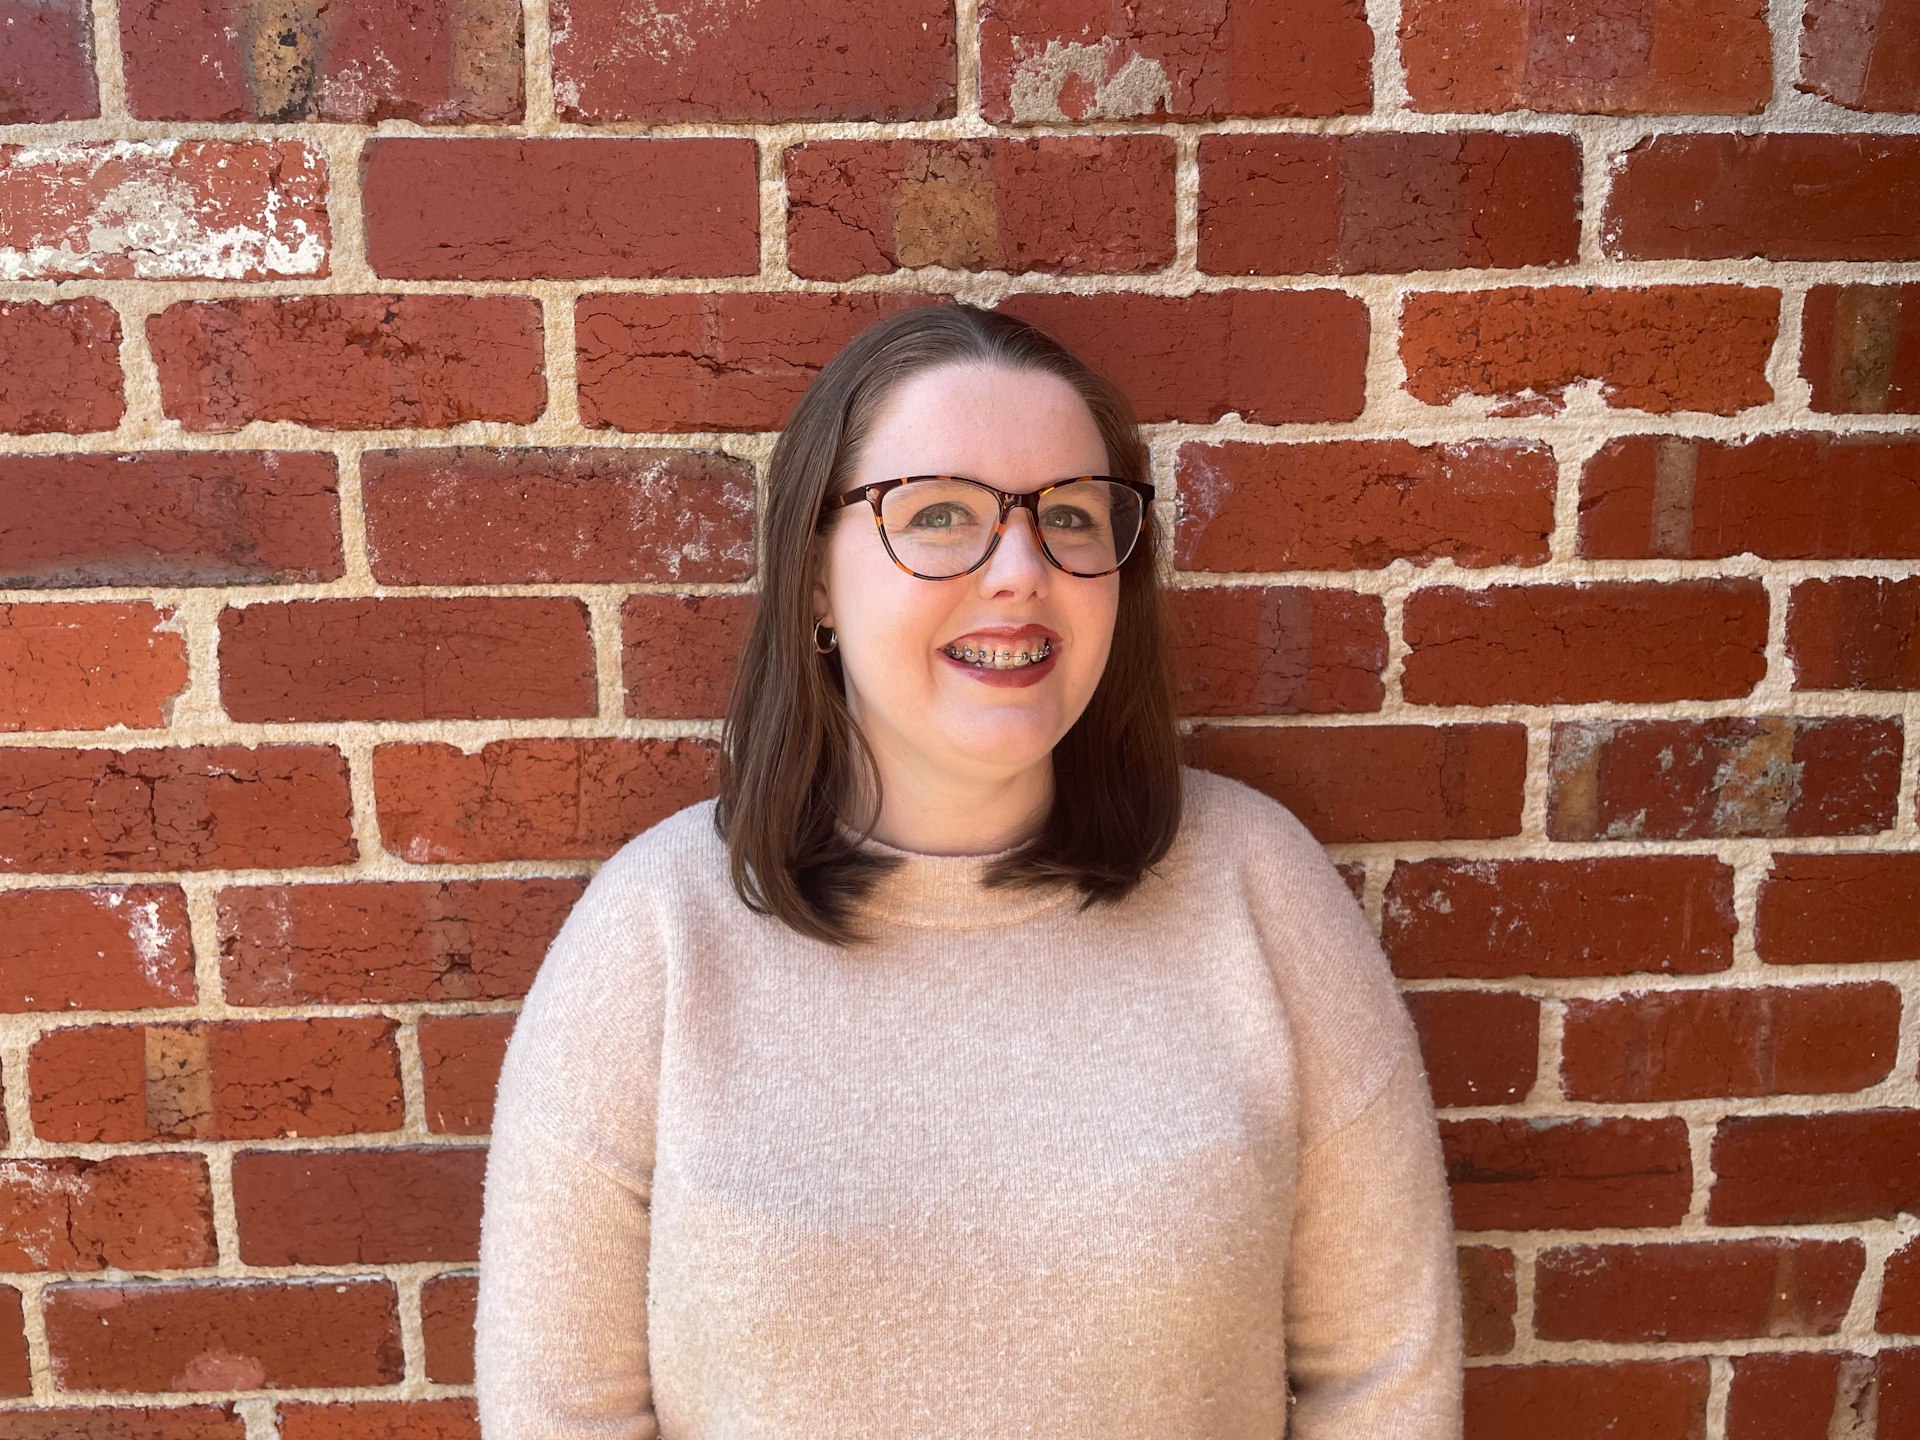 A woman wearing glasses smiling against a brick wall